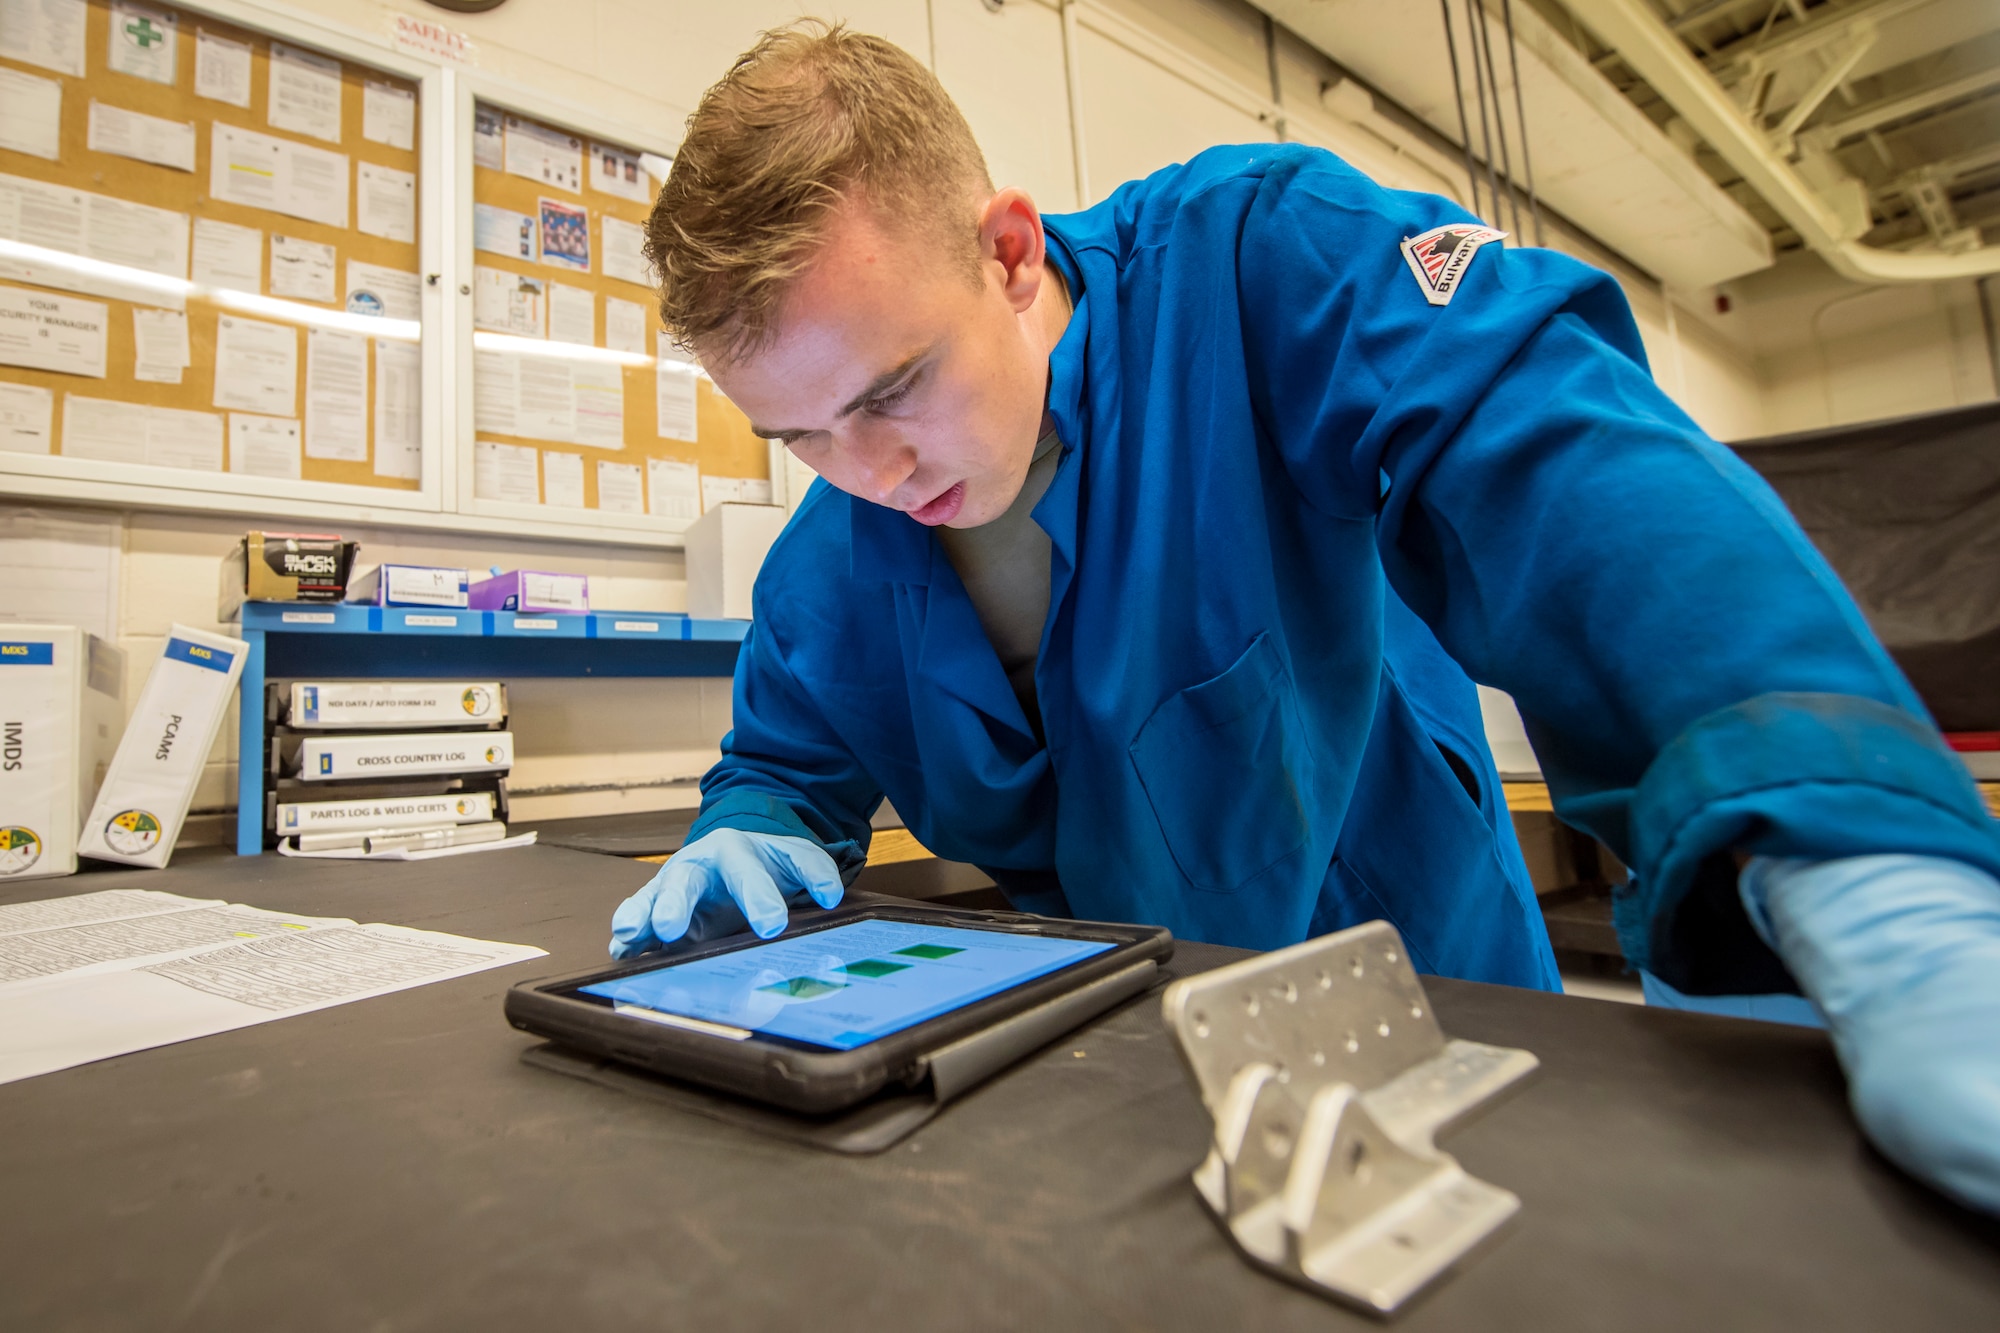 Senior Airman Matthew Horne, 23d Maintenance Squadron non-destructive inspection (NDI) specialist, reads a technical order, May 2, 2018, at Moody Air Force Base, Ga. NDI technicians use various methods to complete these inspections such as X-ray, florescent dye penetrant, oil analysis and ultrasonic scanning to examine and inspect numerous aircraft parts and components to ensure that they are in usable condition. (U.S. Air Force photo by Airman 1st Class Eugene Oliver)